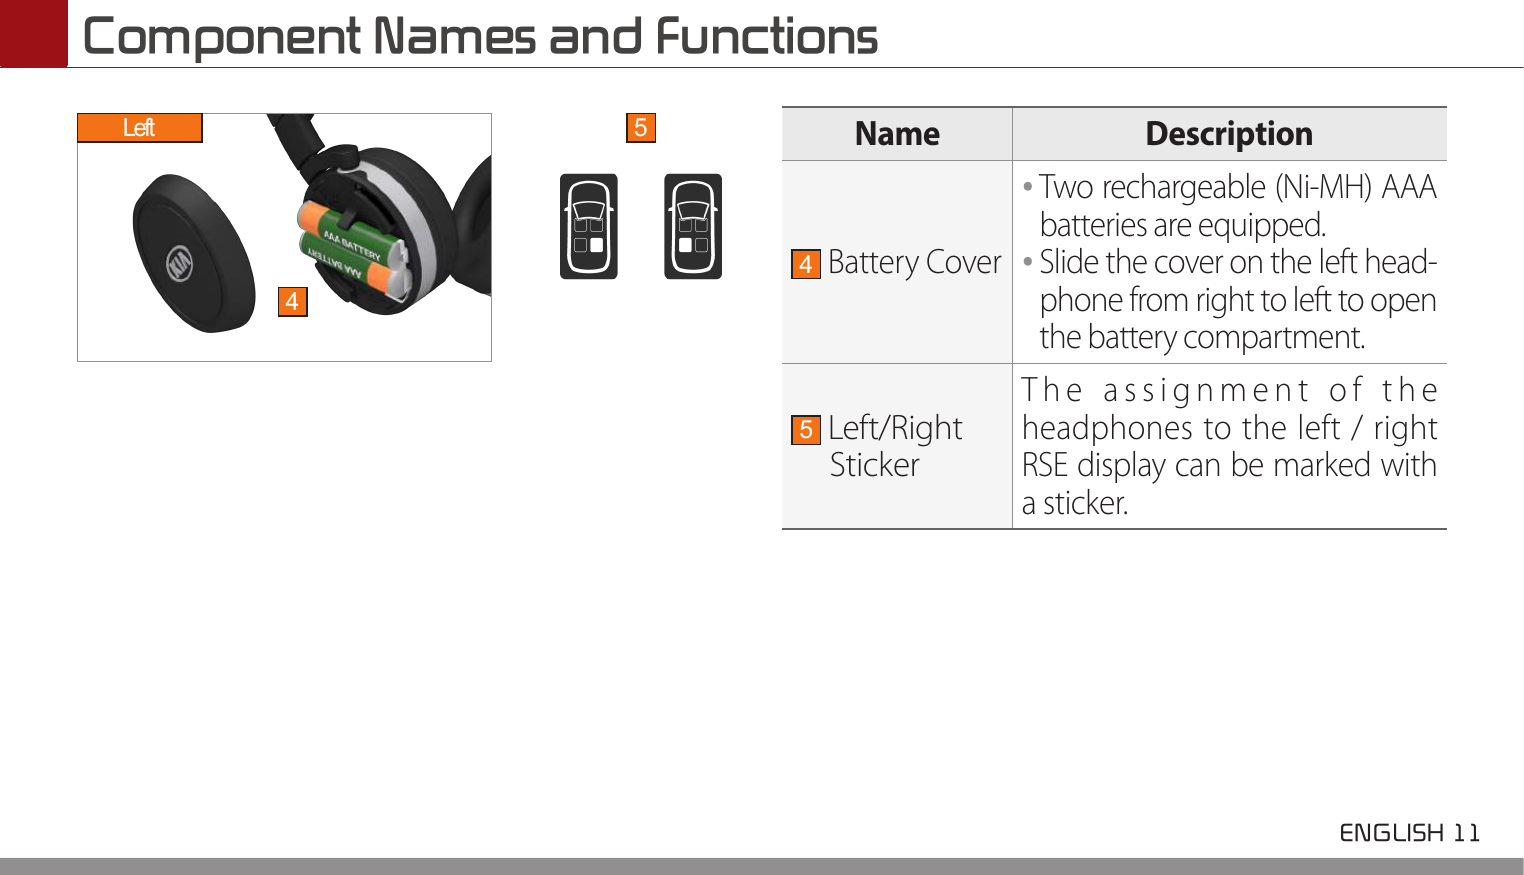  ENGLISH 11 Component Names and FunctionsName Description4 Battery Cover••Two rechargeable (Ni-MH) AAA batteries are equipped.••Slide the cover on the left head-phone from right to left to open the battery compartment. 5 Left/Right StickerThe assignment of the headphones to the left / right RSE display can be marked with a sticker. Left45